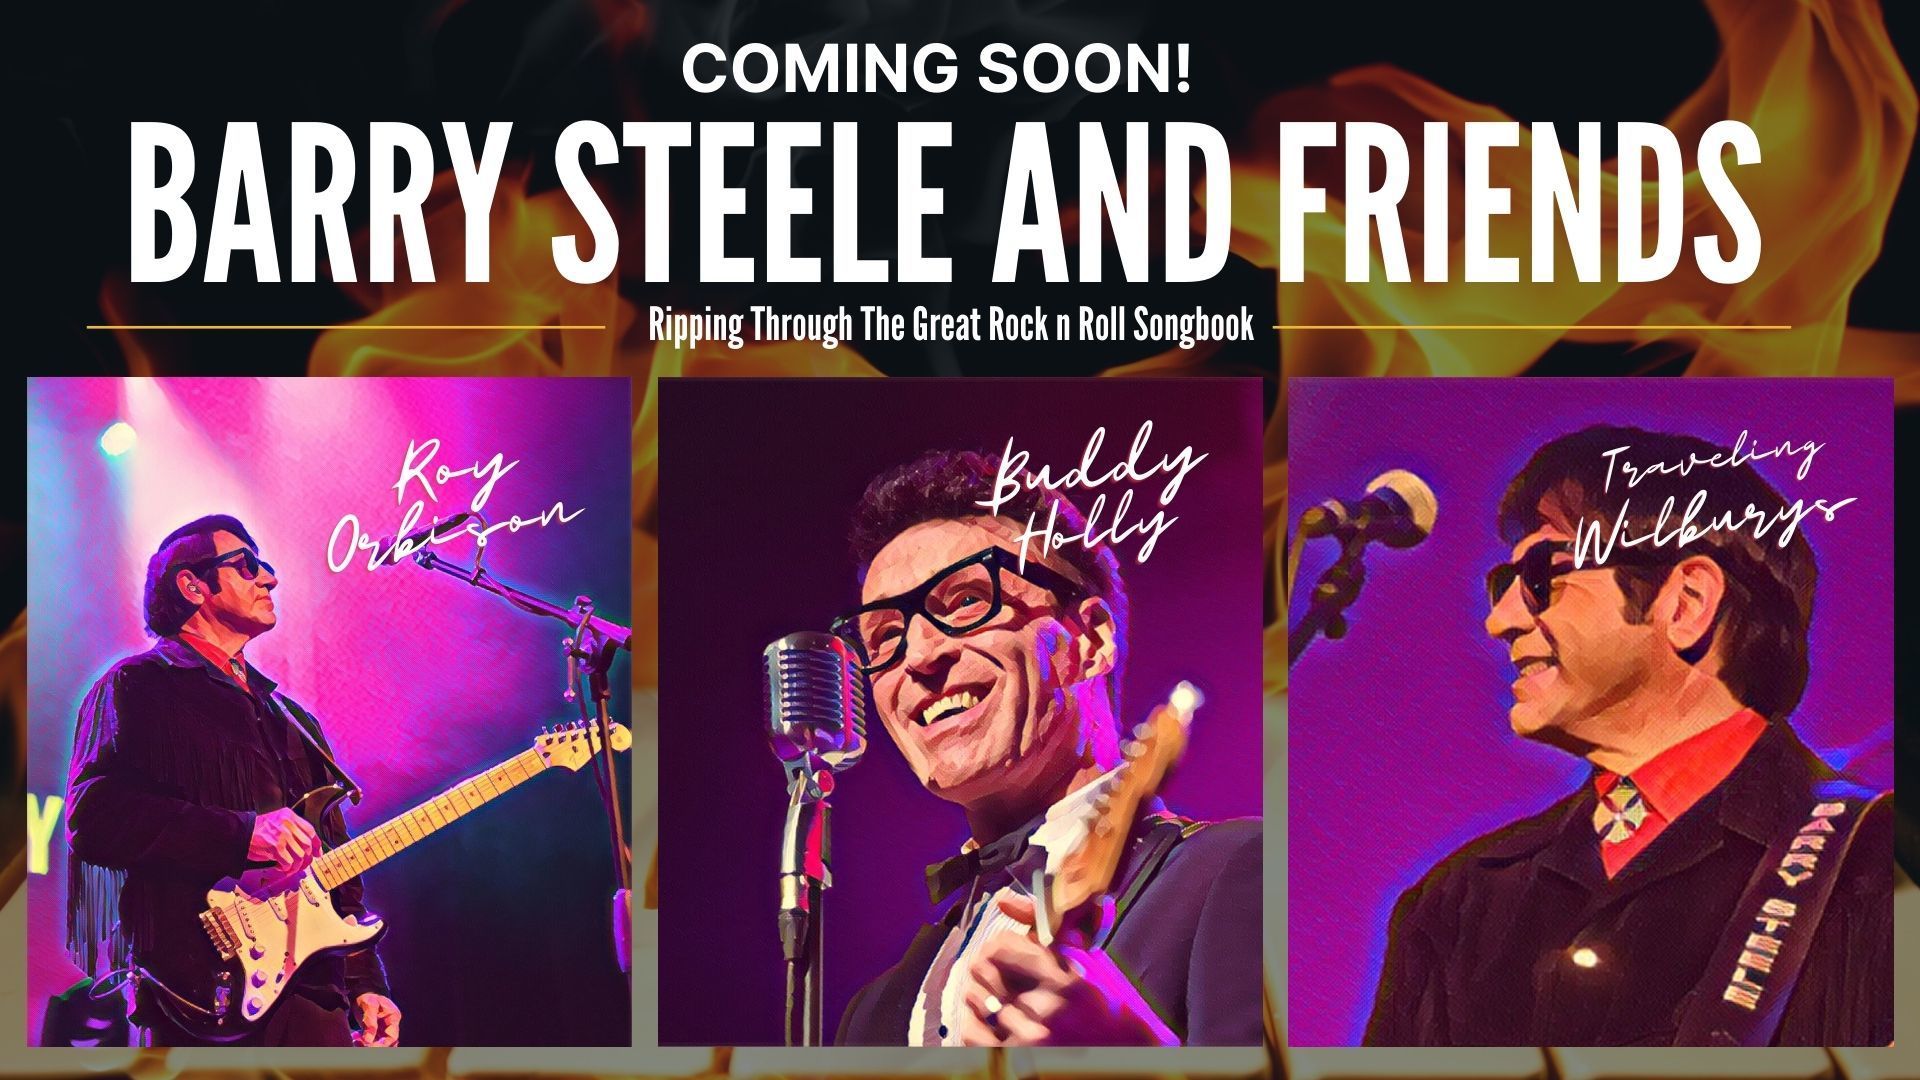 Barry Steele and Friends - The Roy Orbison and Traveling Wilburys Story - With special guests, Bradford, England, United Kingdom